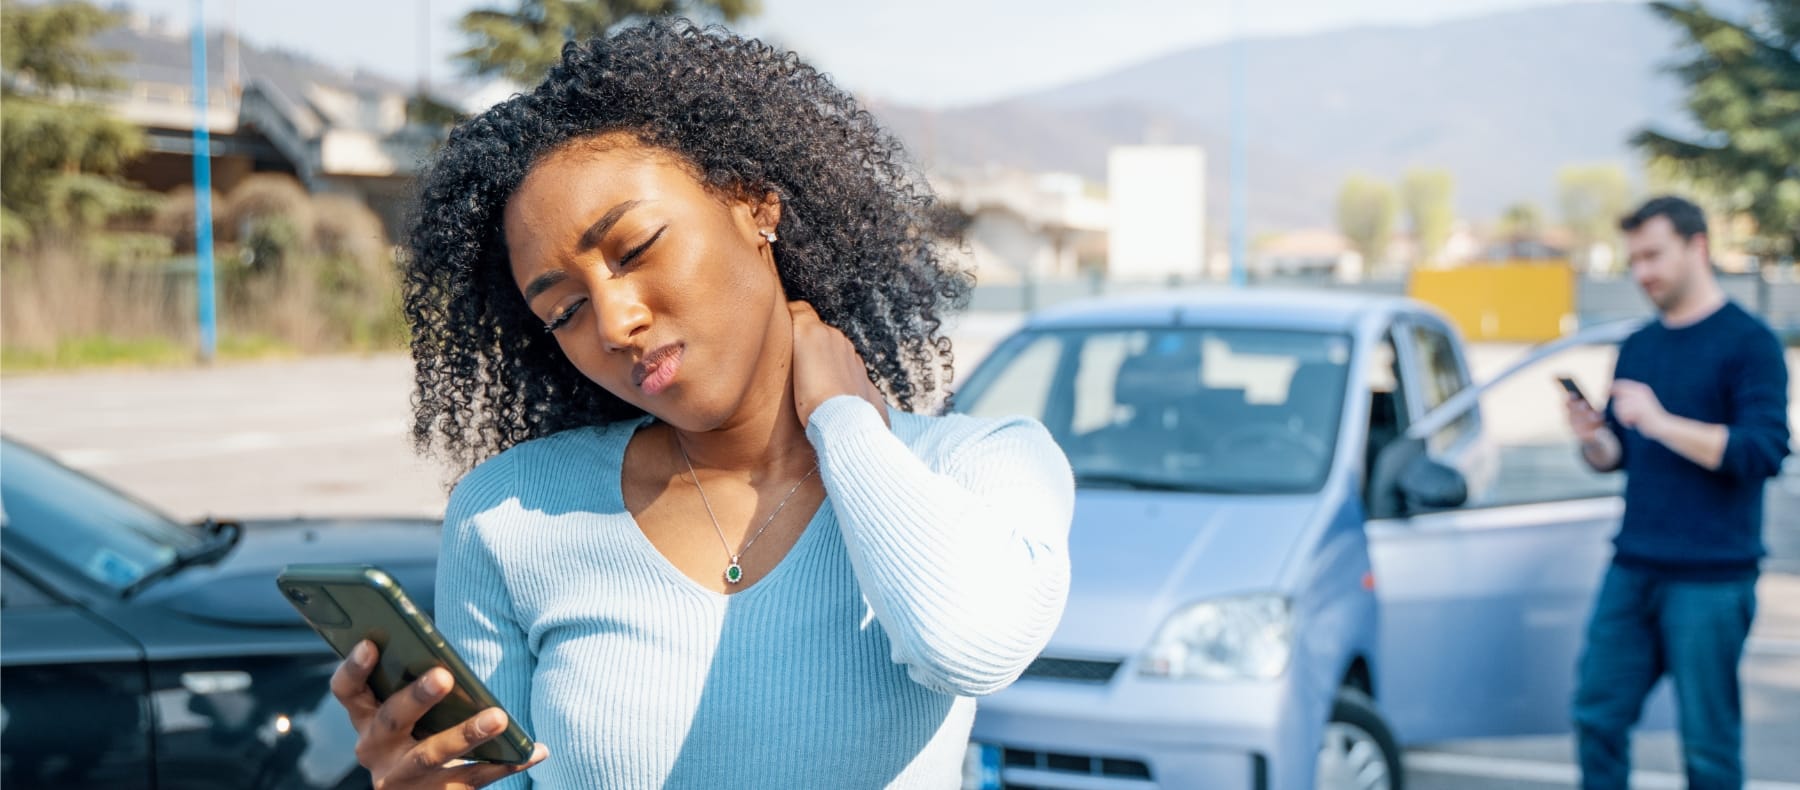 A woman standing near the scene of a car accident, holding her neck while looking at her phone.